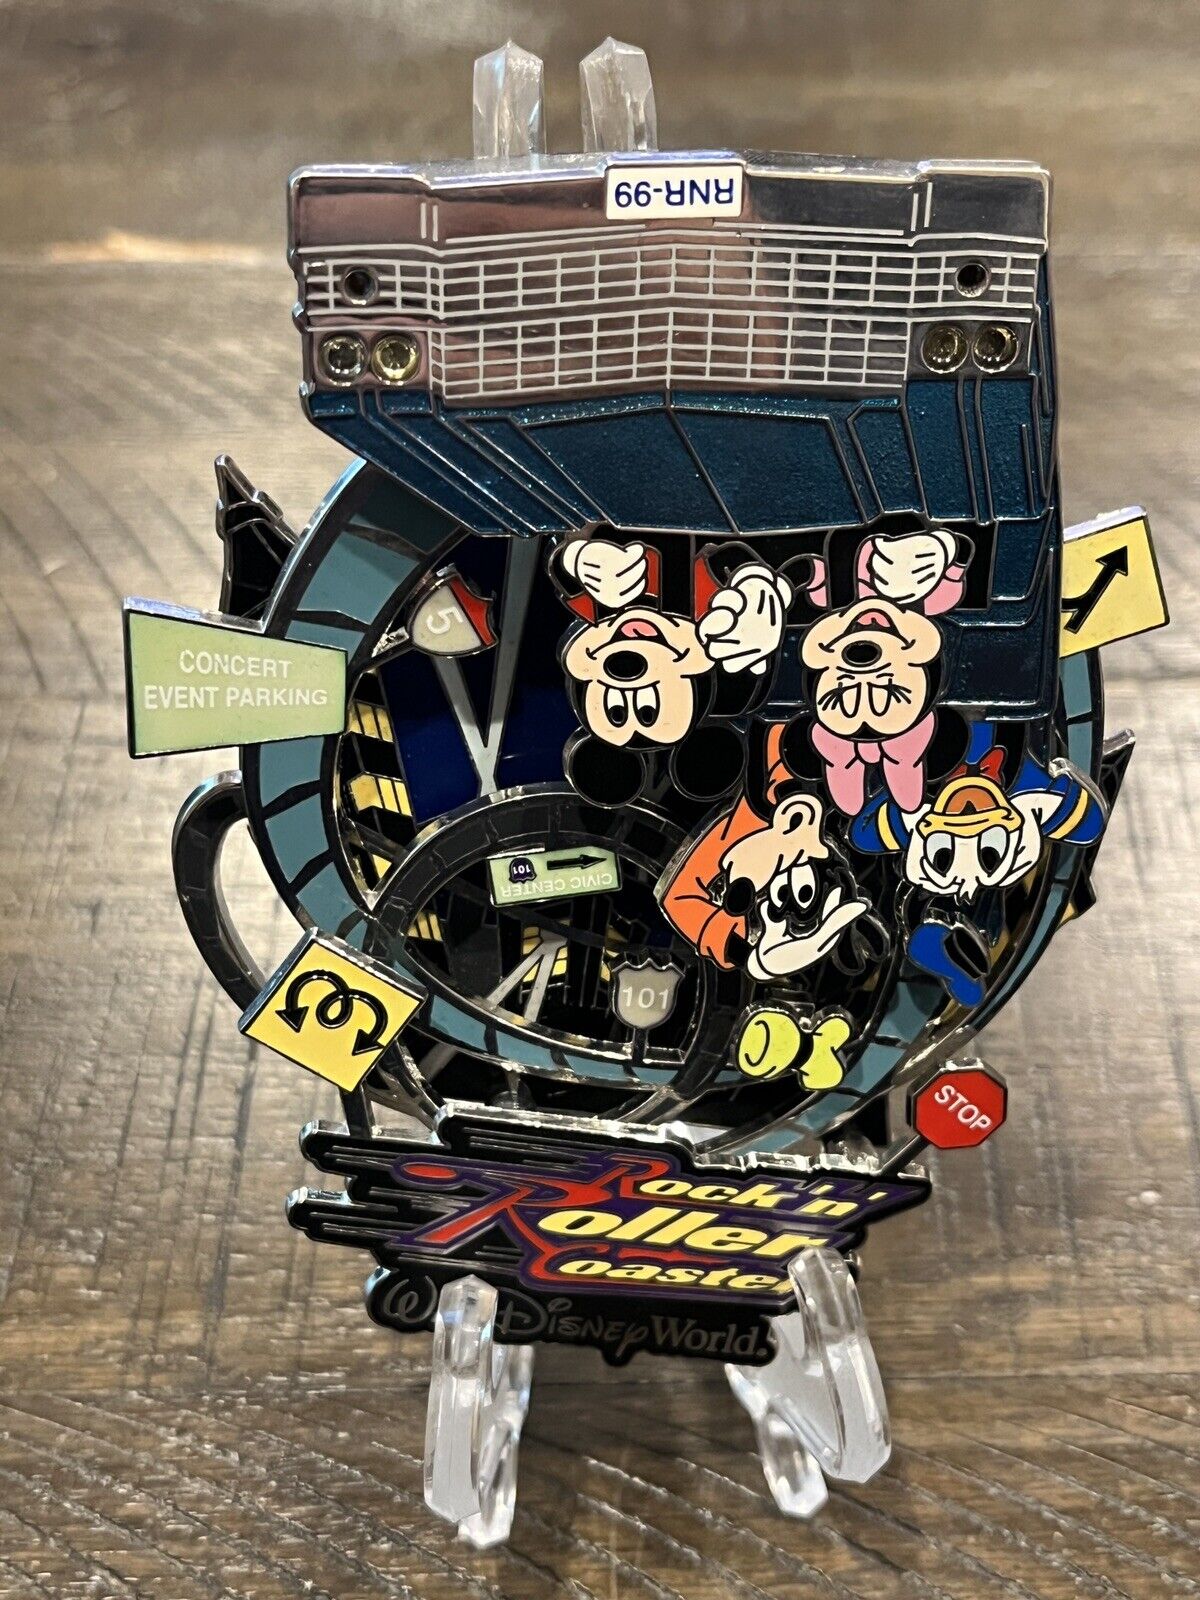 Pin on Roller Coasters